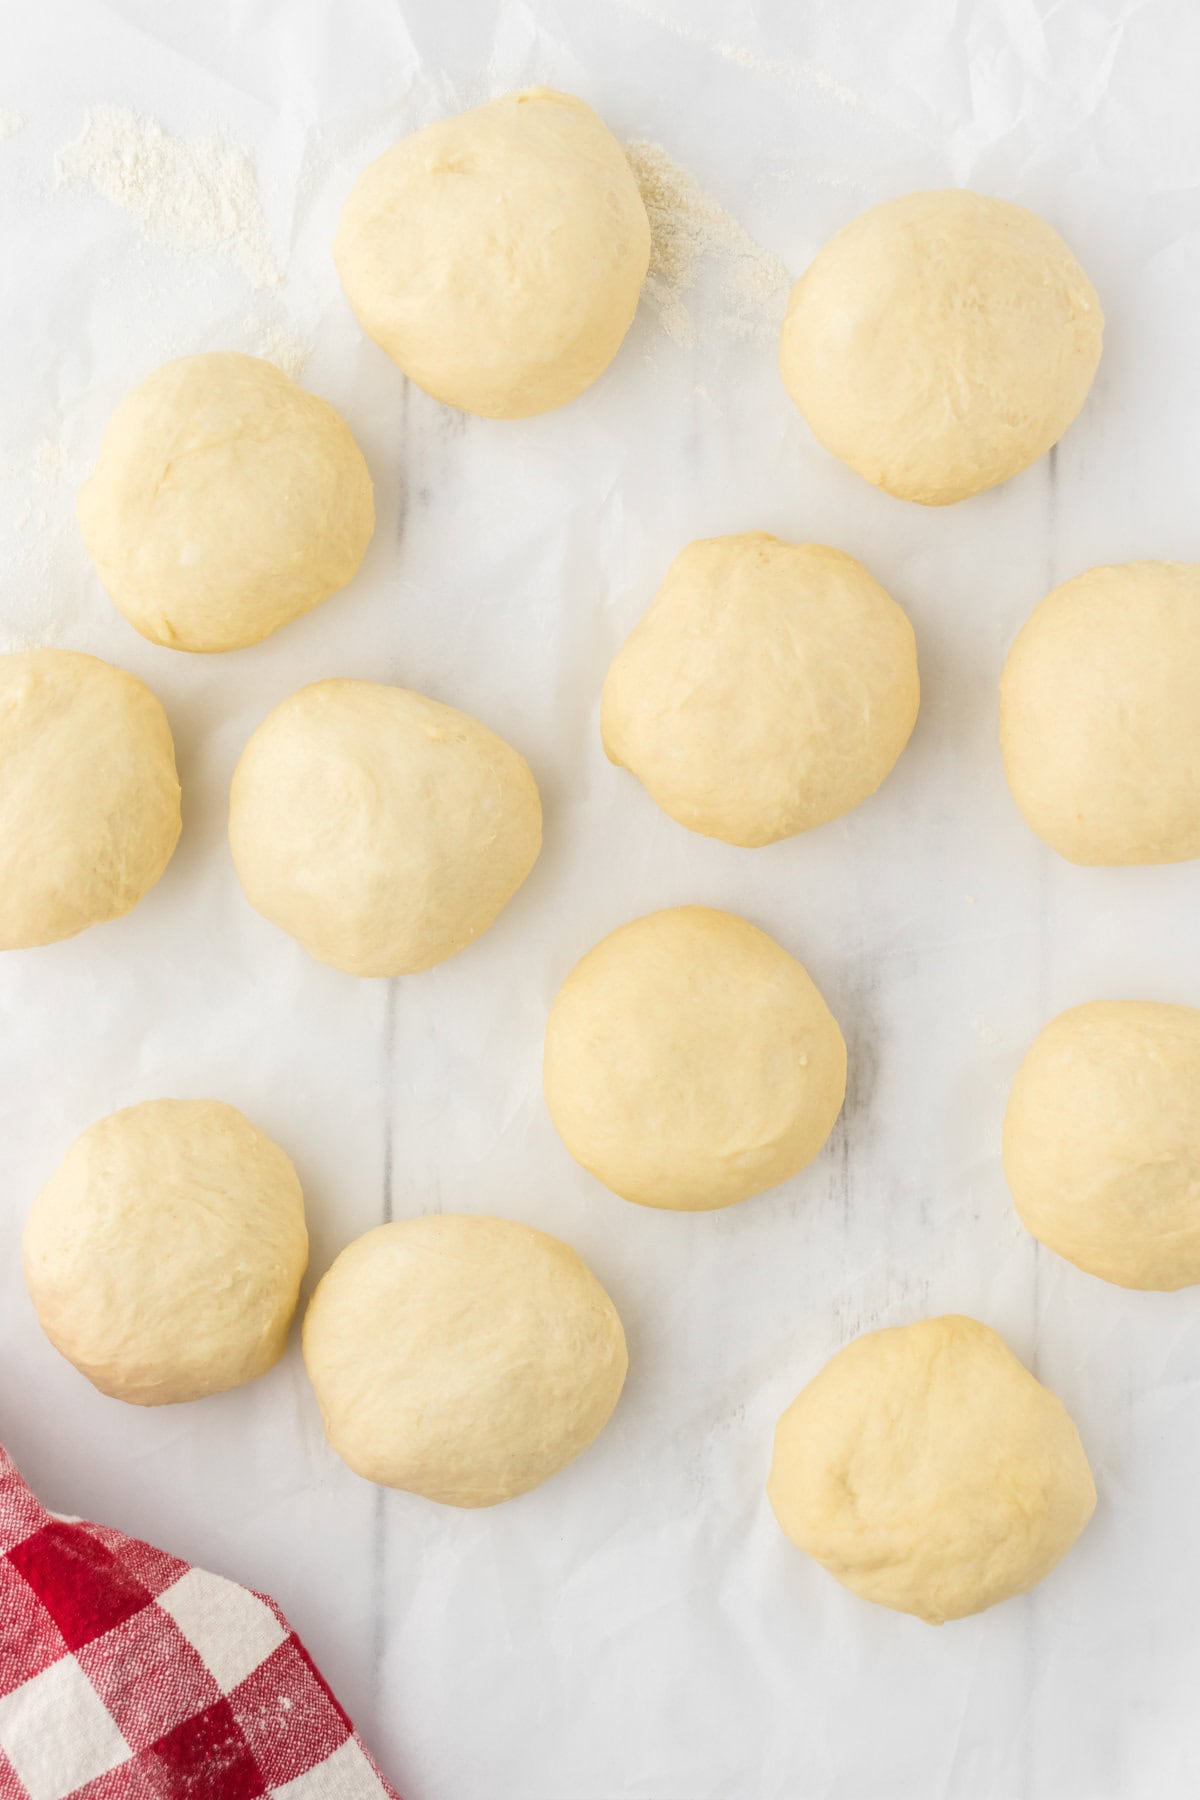 Dough is separated into equal pieces and formed into buns.